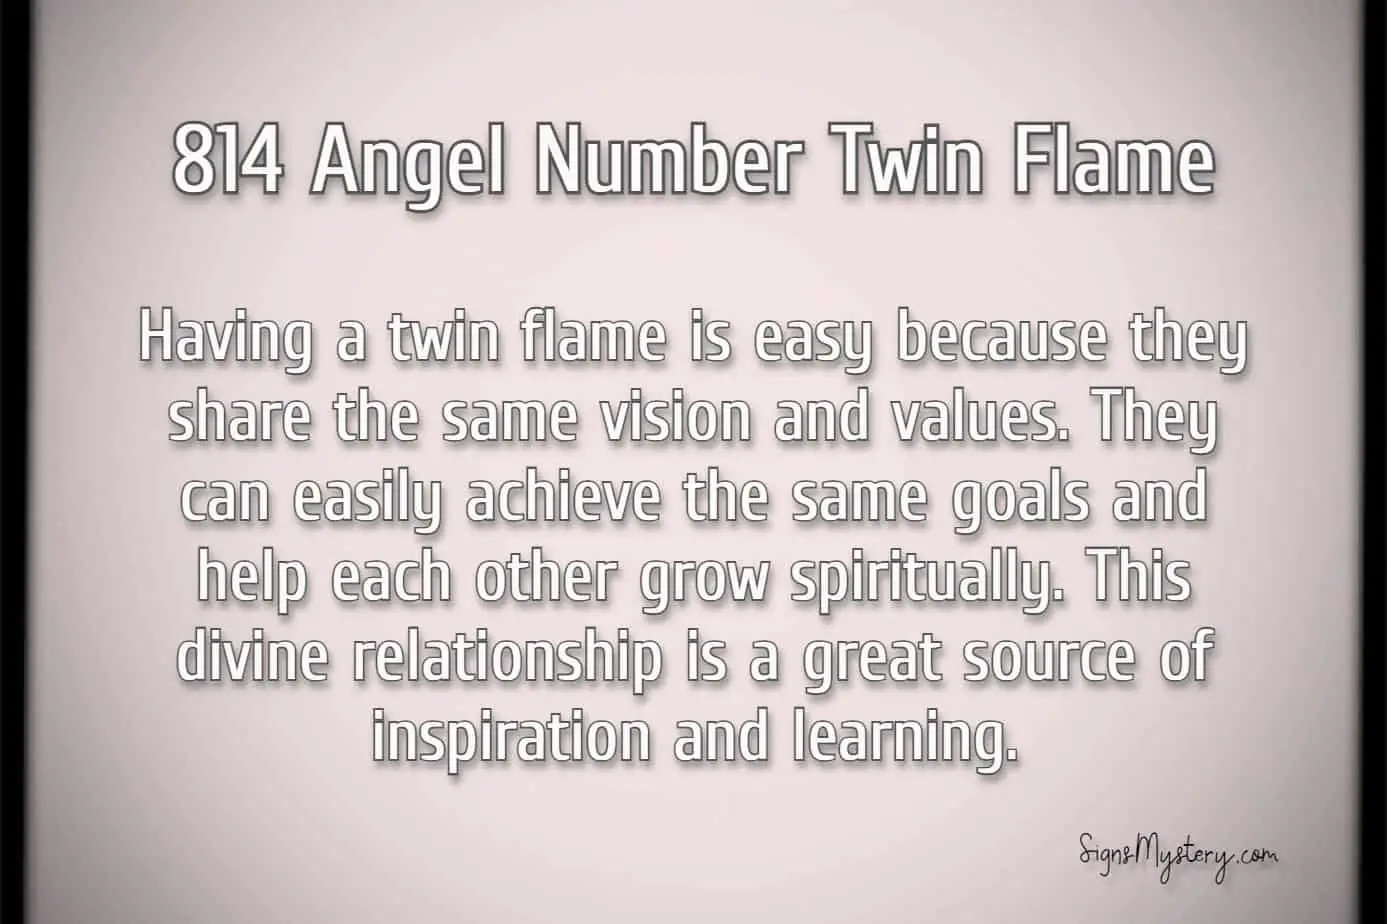 814 angel number twin flame